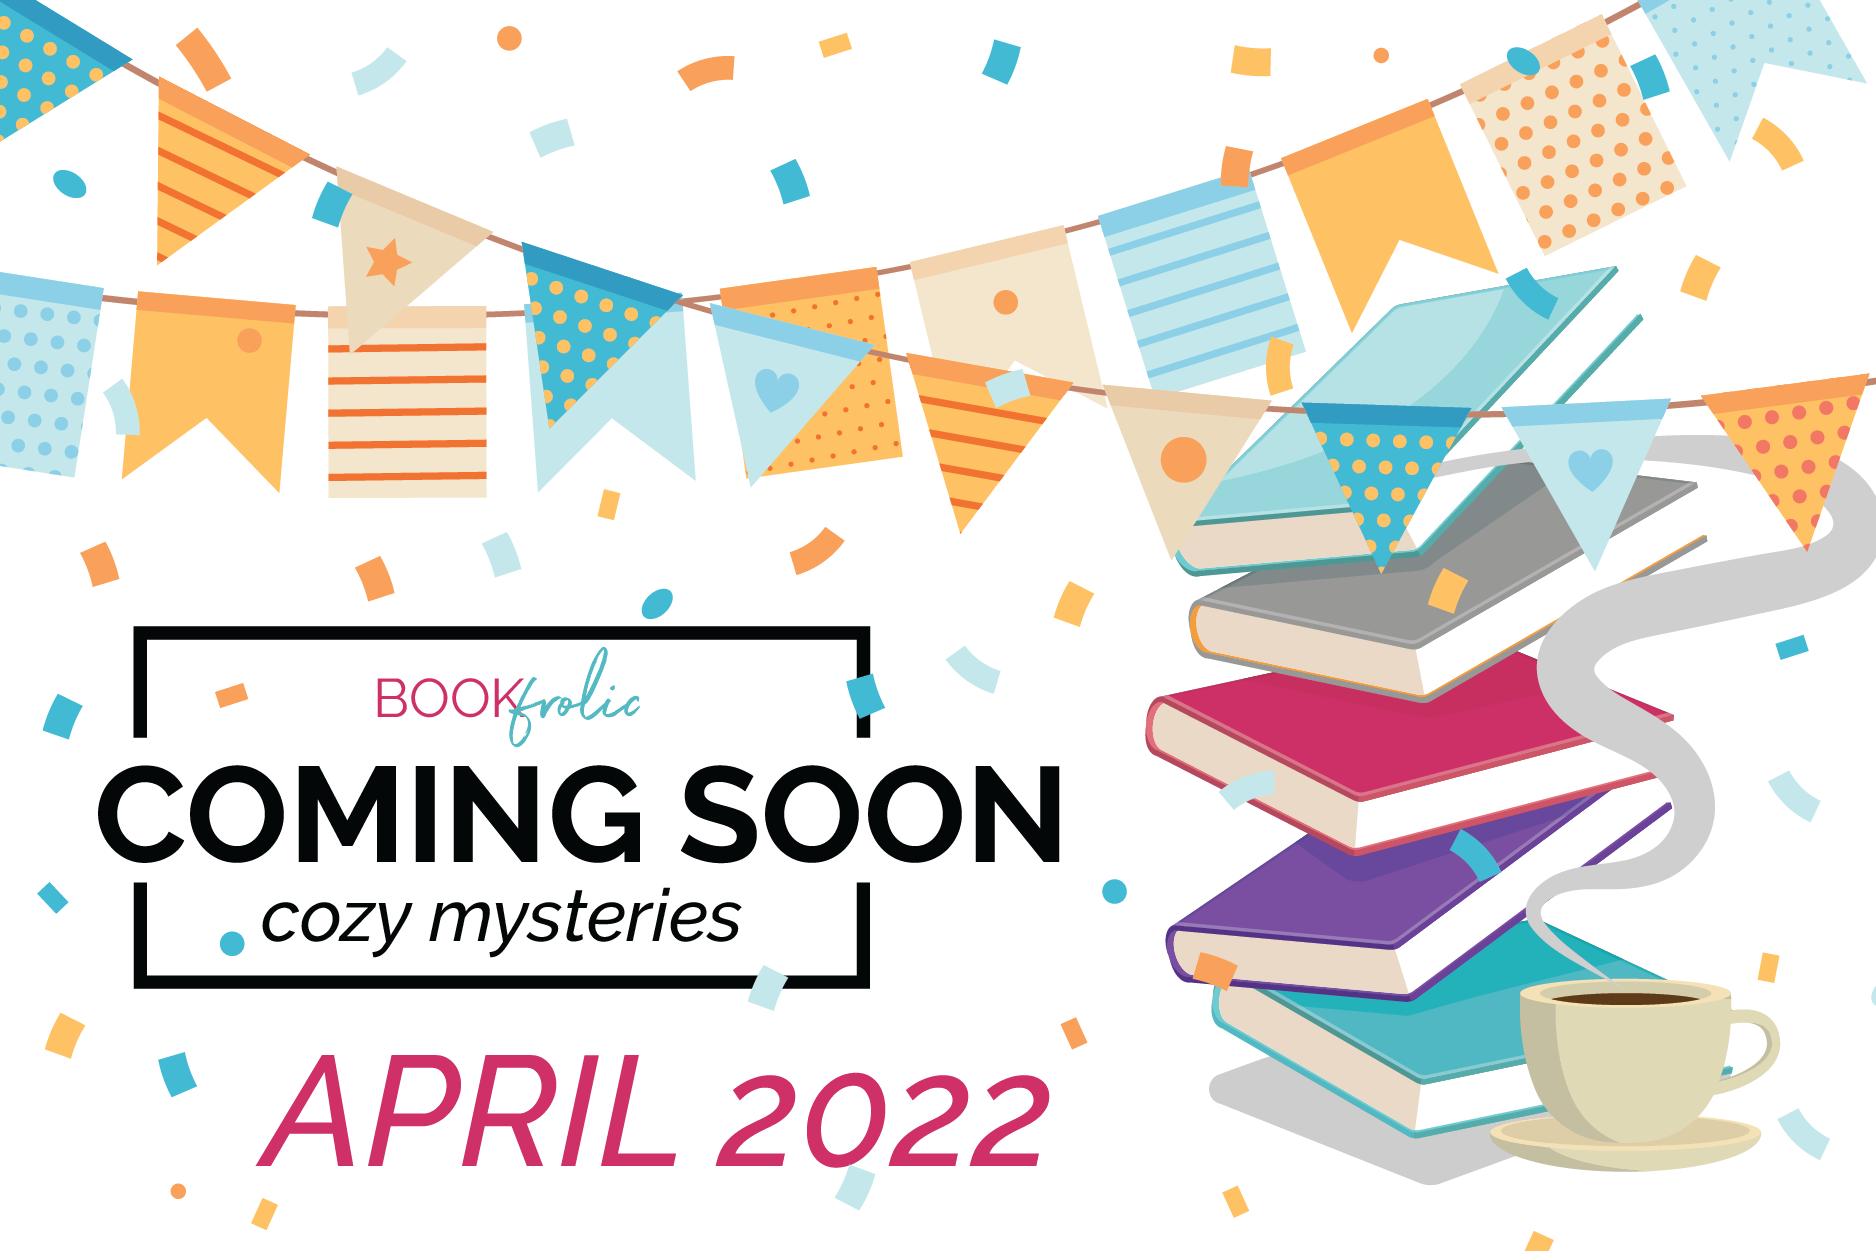 Coming soon - cozy mystery new releases for April 2022